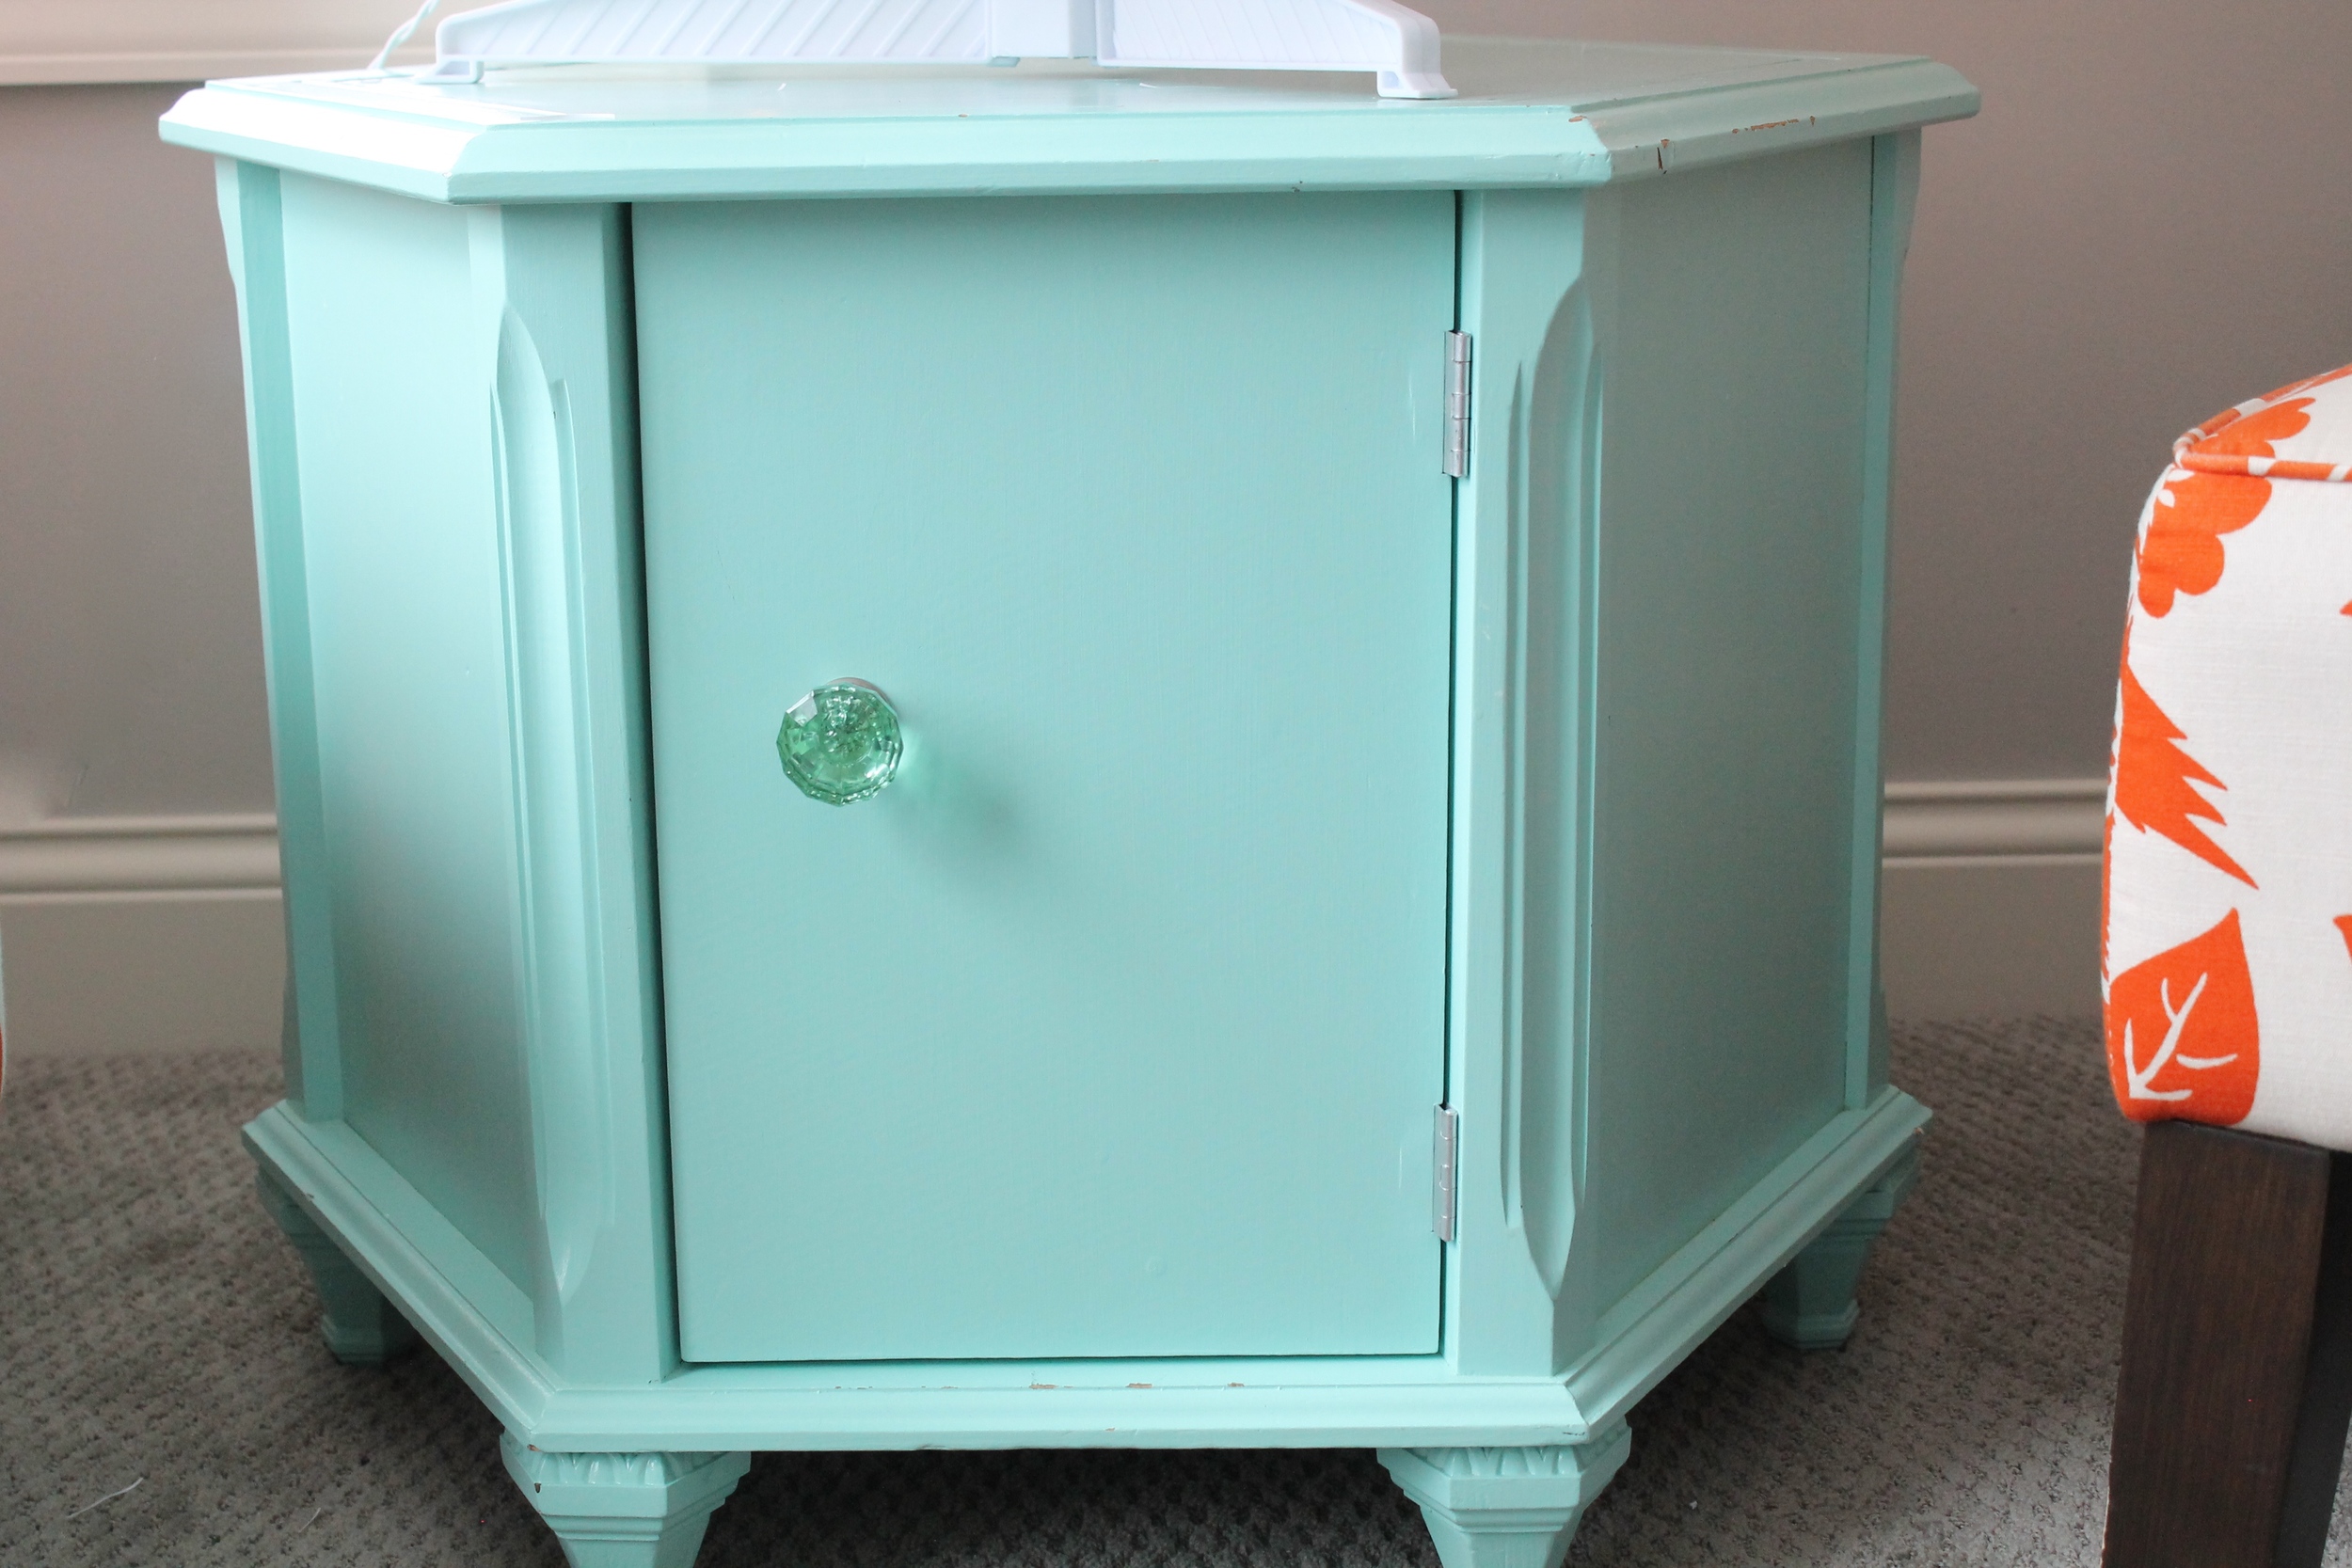 Painted Aqua Side Table Used as a Christmas Tree Stand